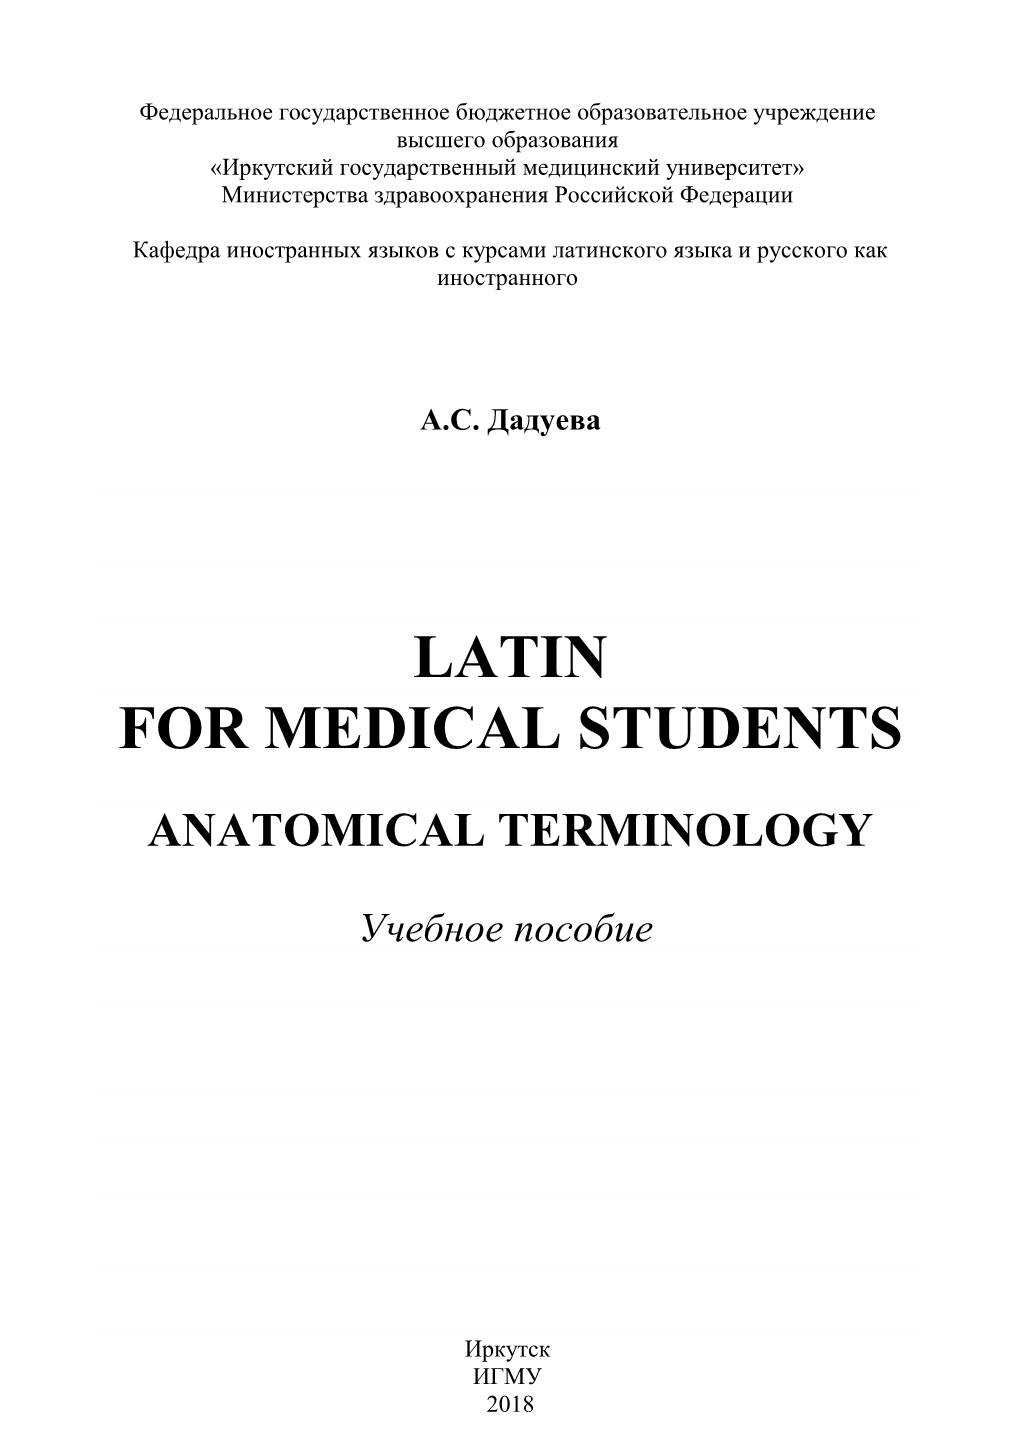 Latin for Medical Students